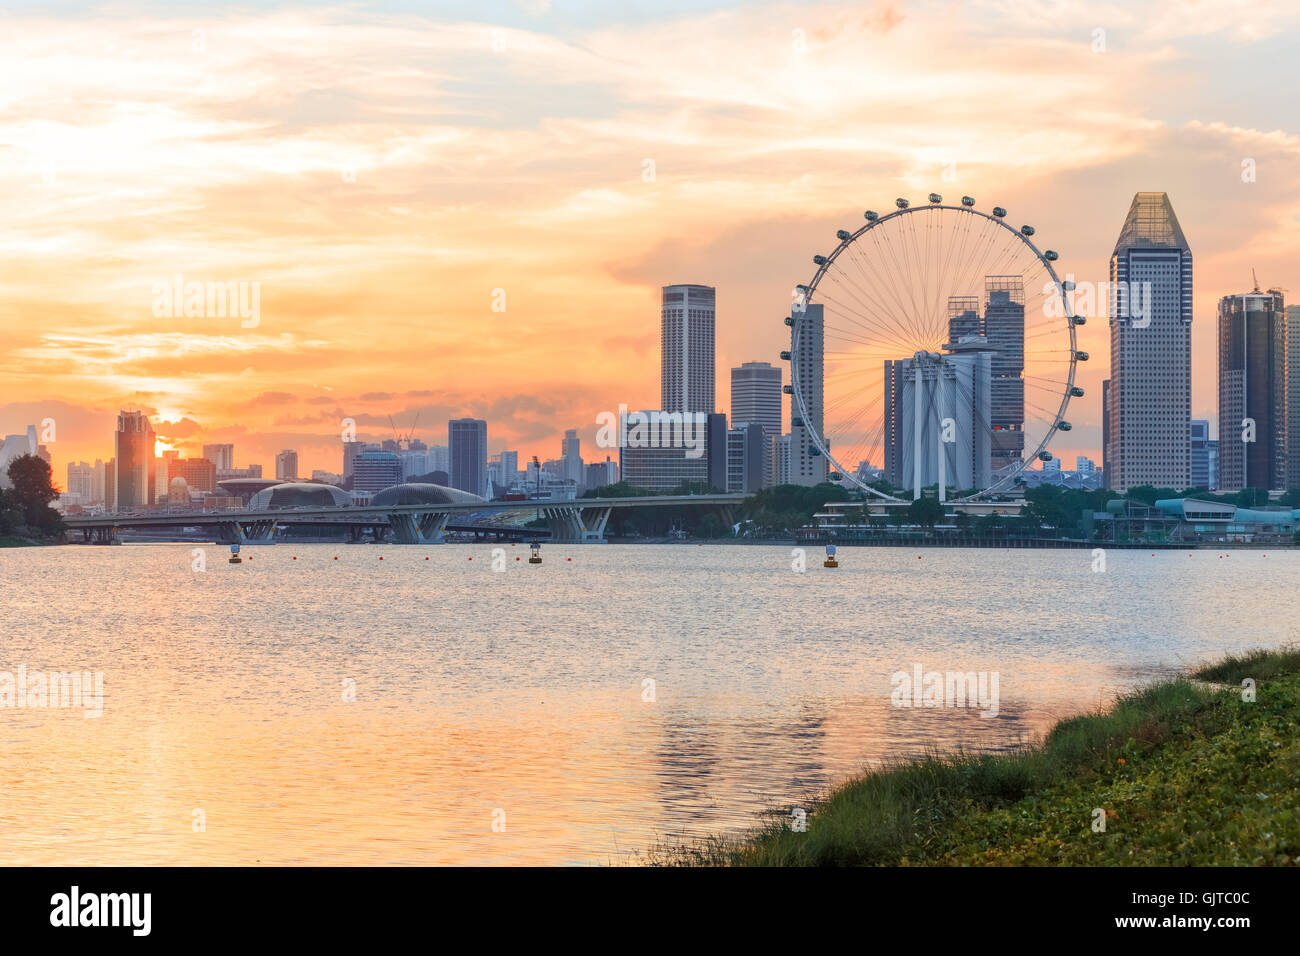 View of central Singapore Stock Photo